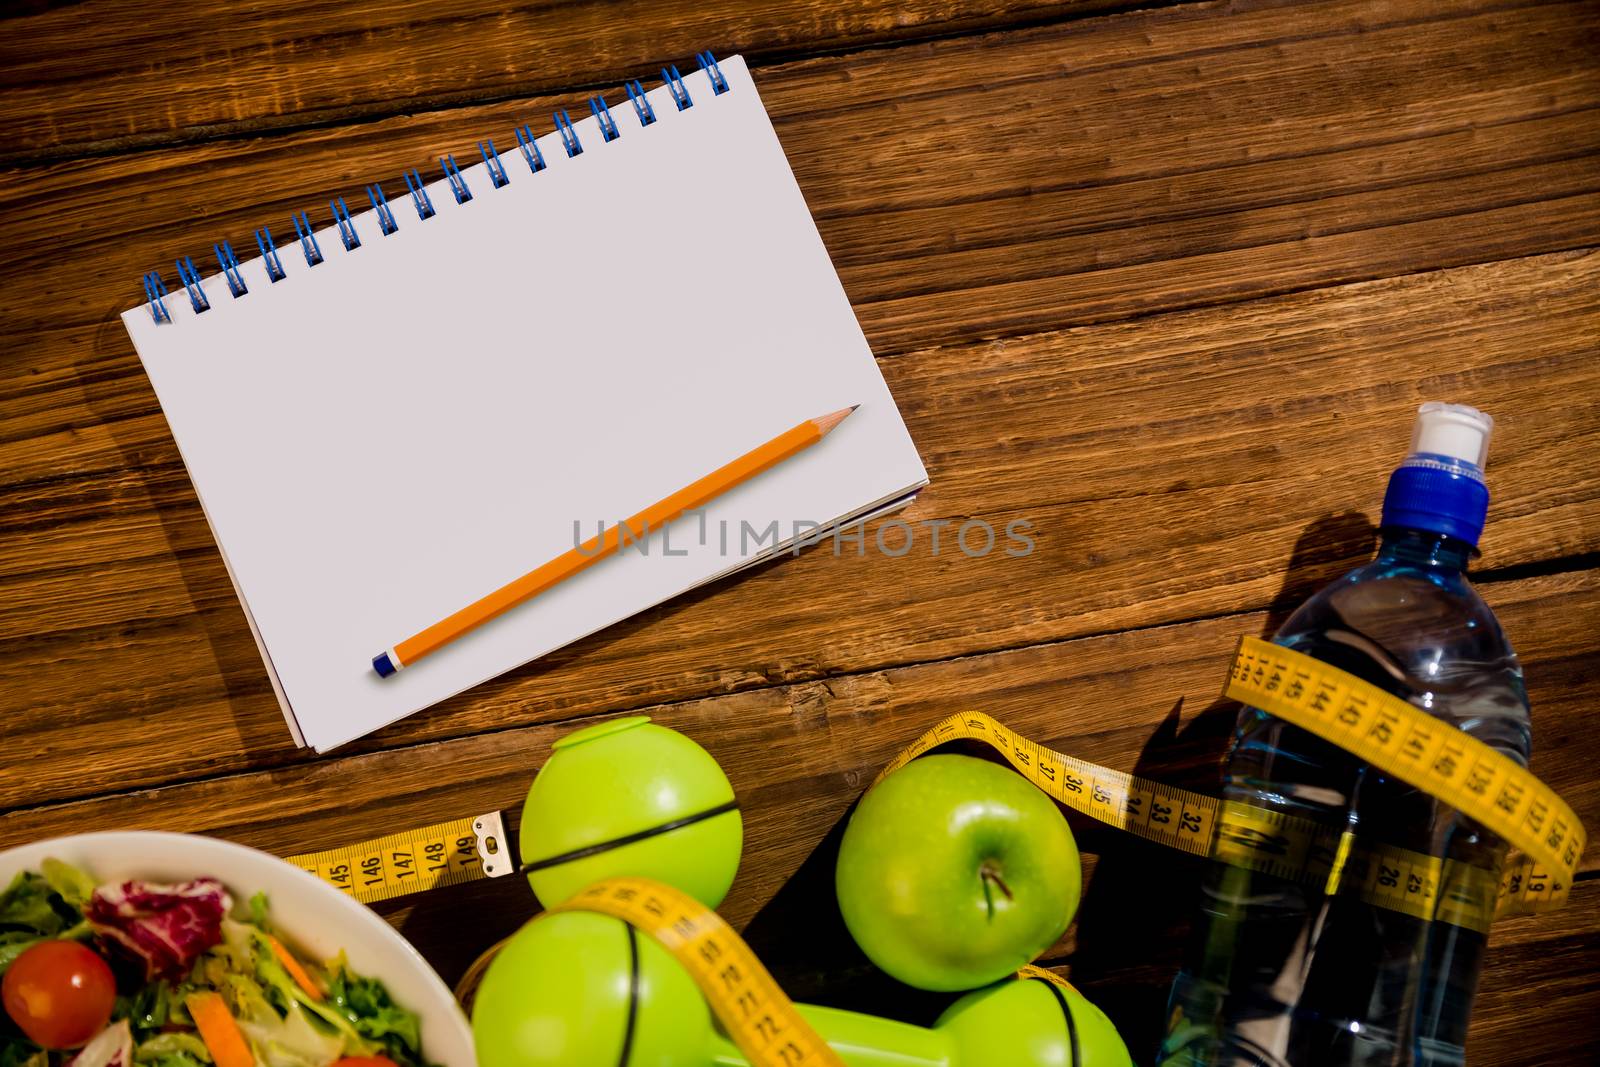 Notepad with indicators of healthy lifestyle on wooden table